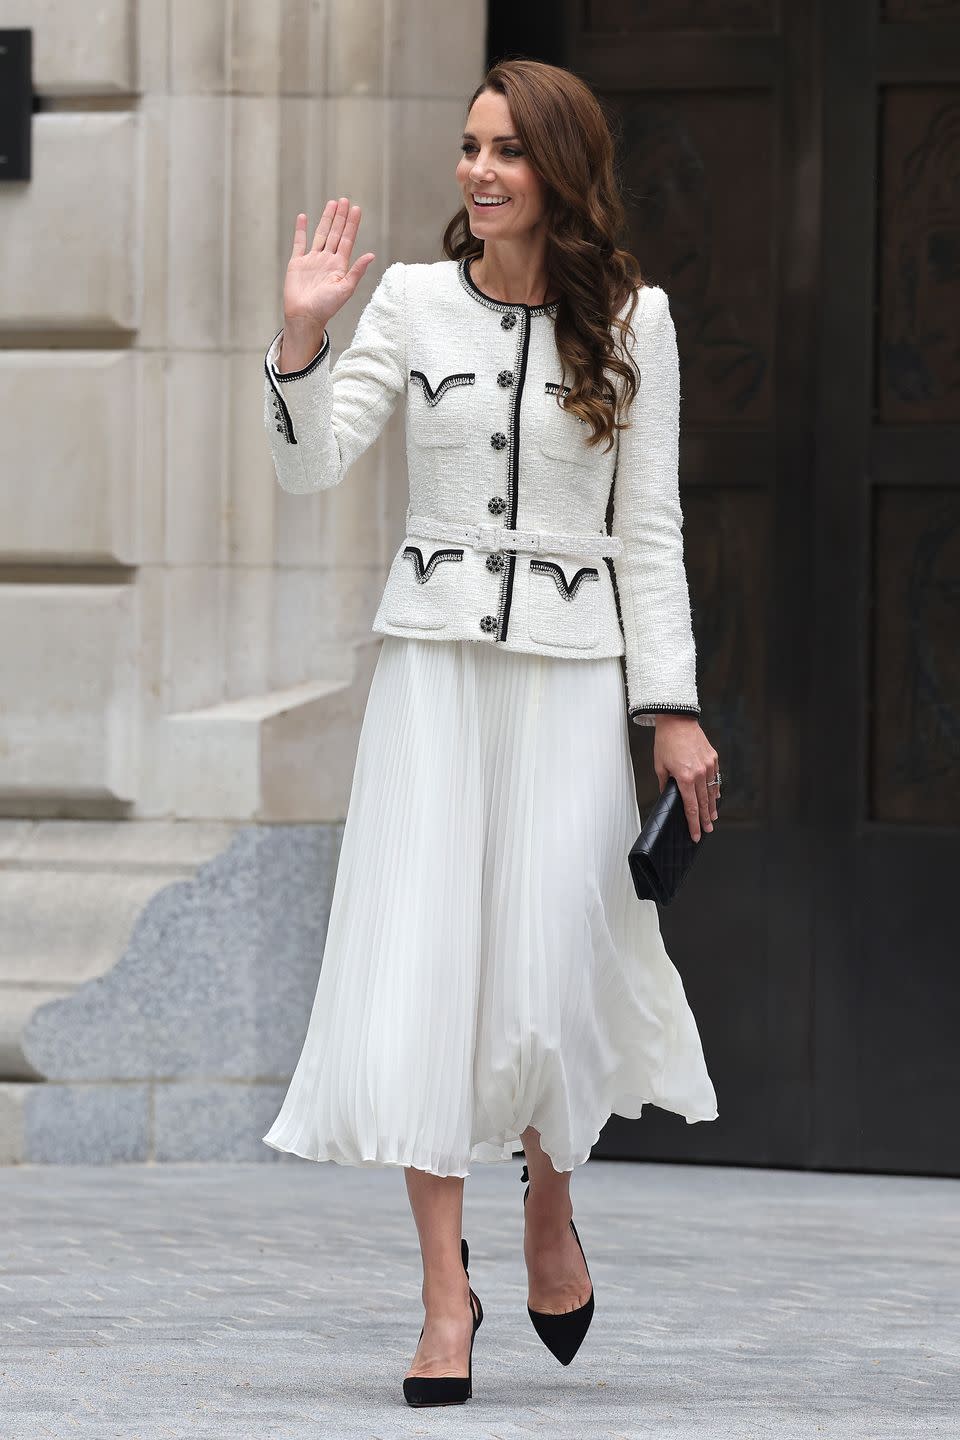 london, england june 20 catherine, princess of wales leaving the reopening of the national portrait gallery on june 20, 2023 in london, england the princess of wales is opening the national portrait gallery following a three year refurbishment programme photo by neil mockfordgc images